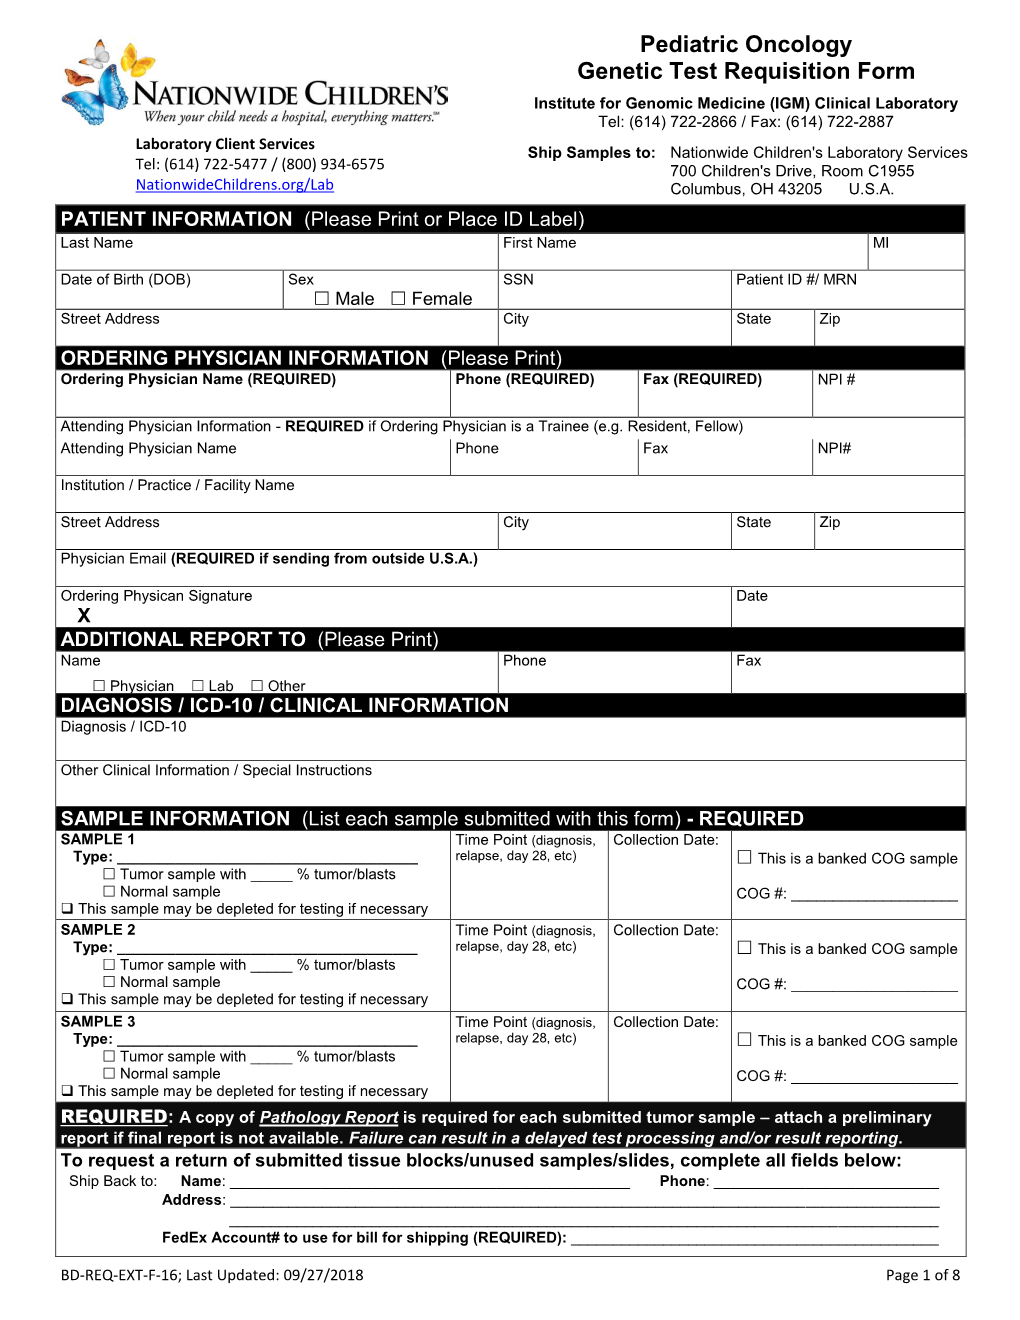 Pediatric Oncology Genetic Test Requisition Form